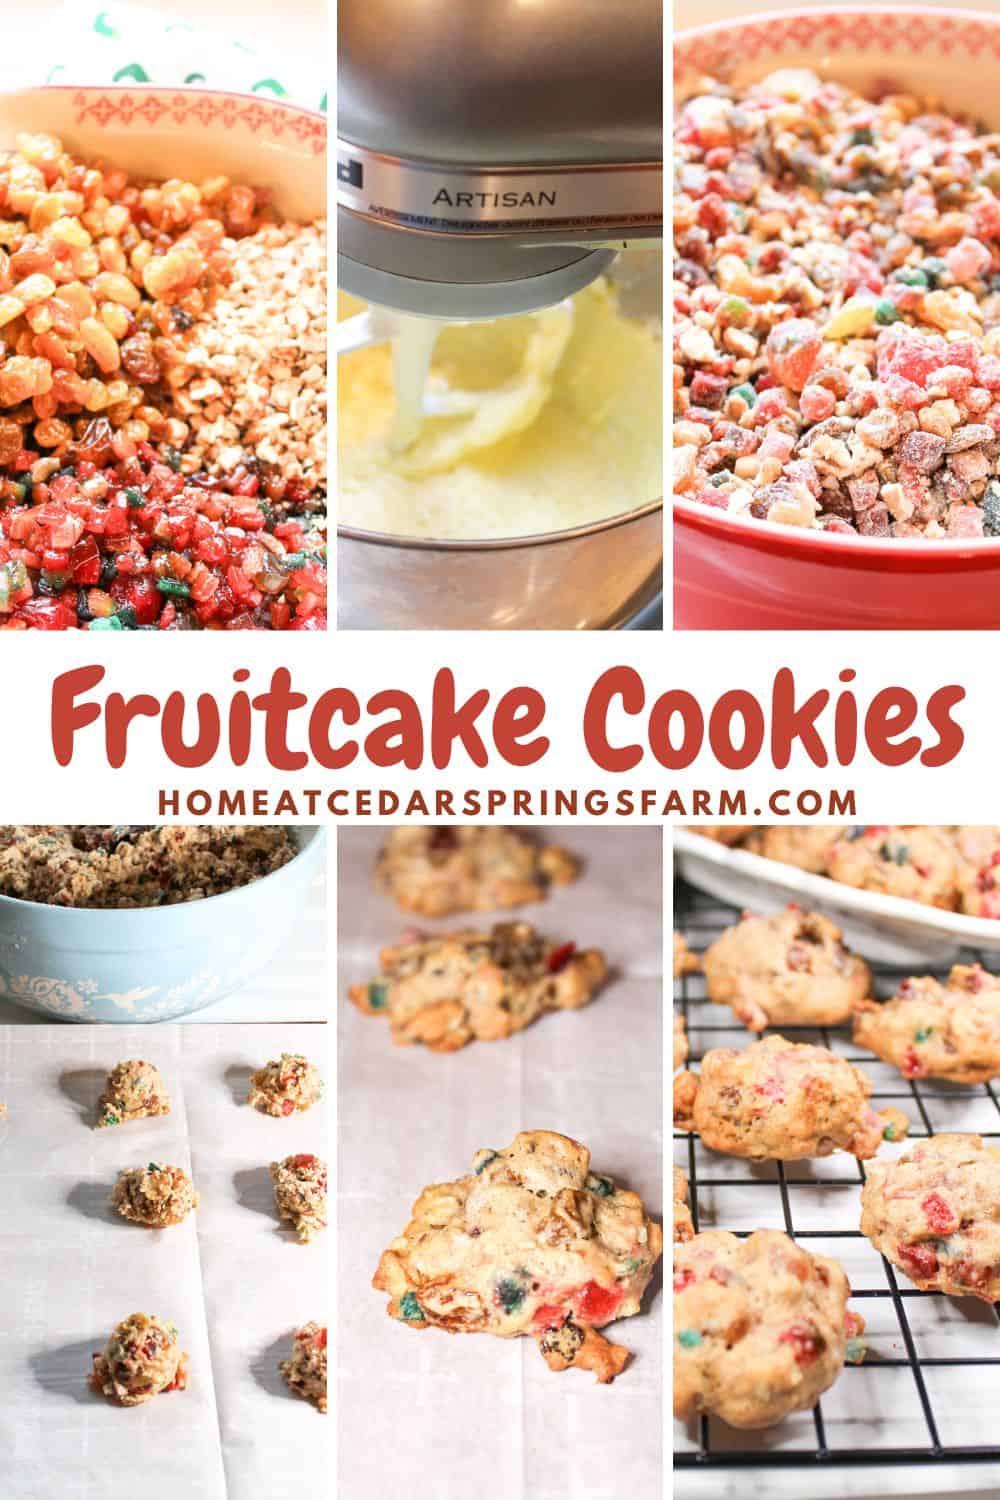 Steps shown for making fruitcake cookies with text overlay.